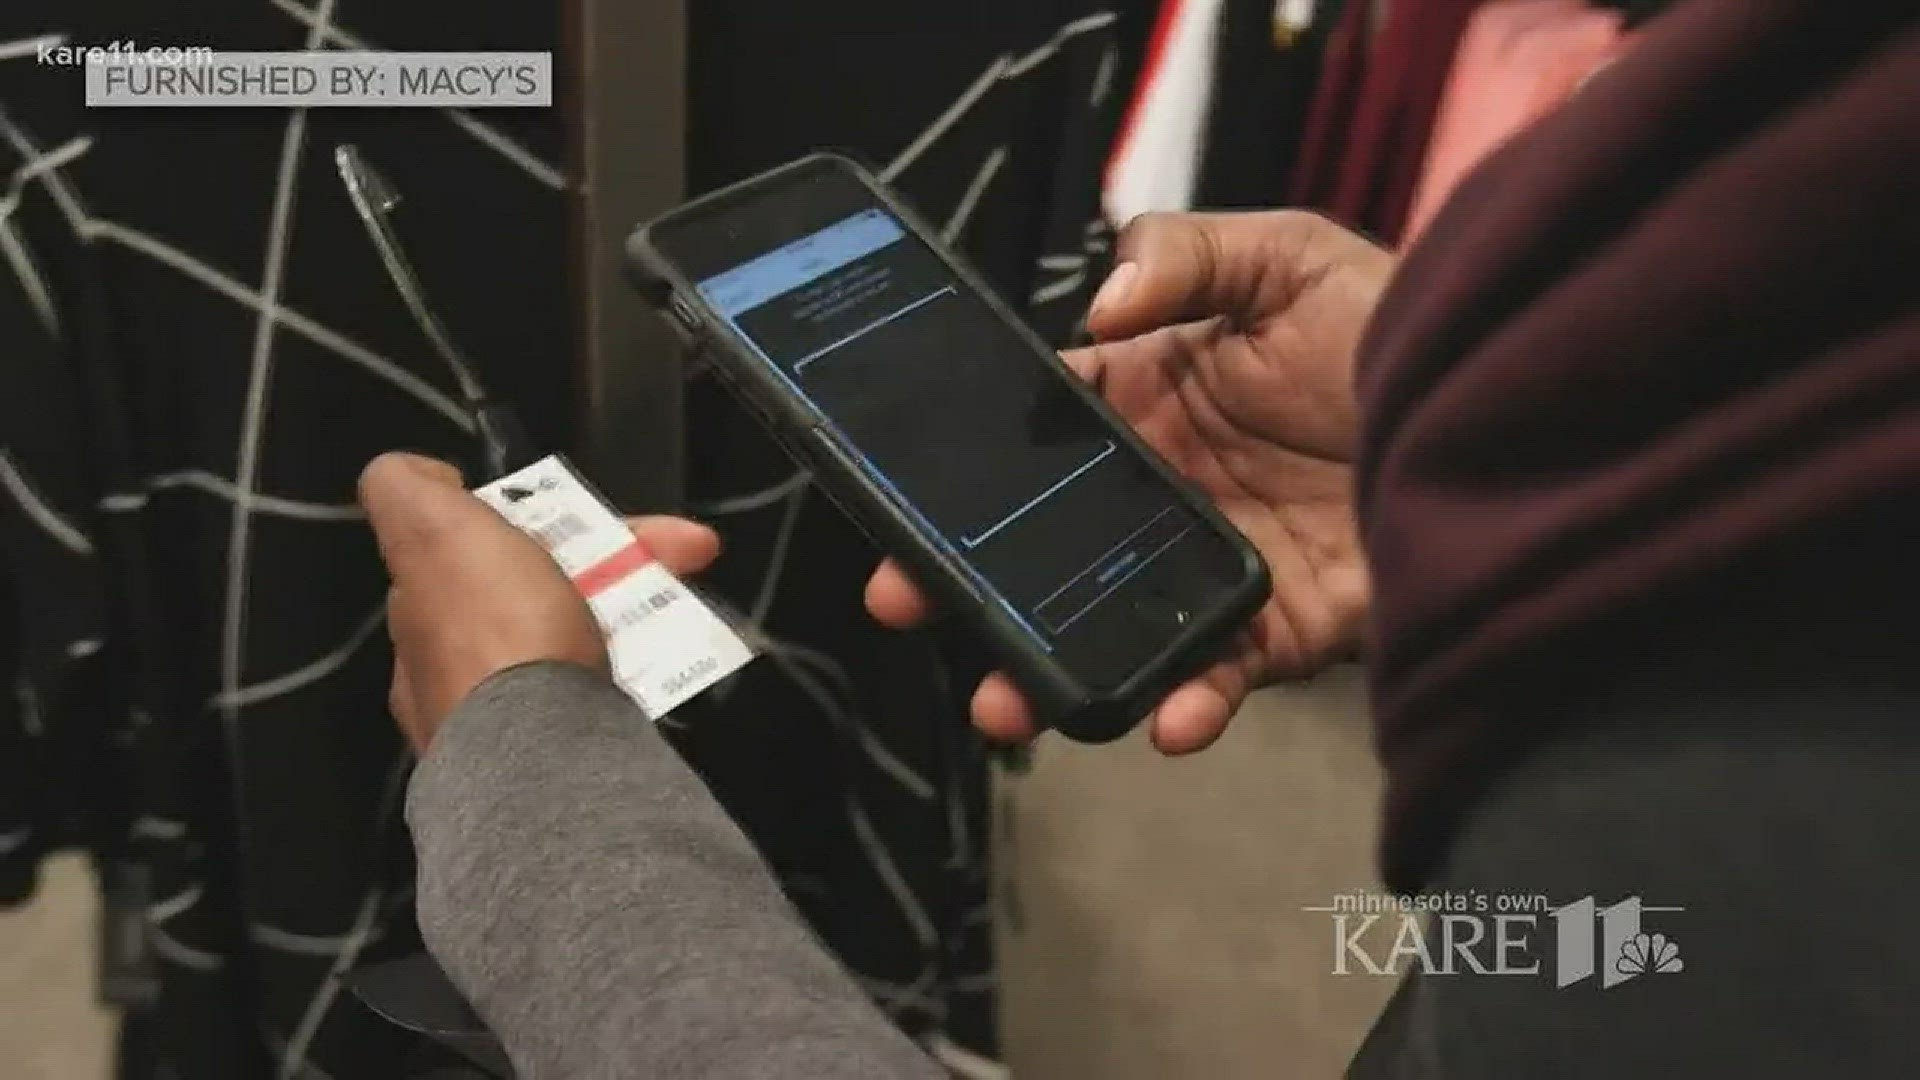 Scan, pay, go. That's how Macy's describes it. Here's how it works. http://kare11.tv/2IJpaP8